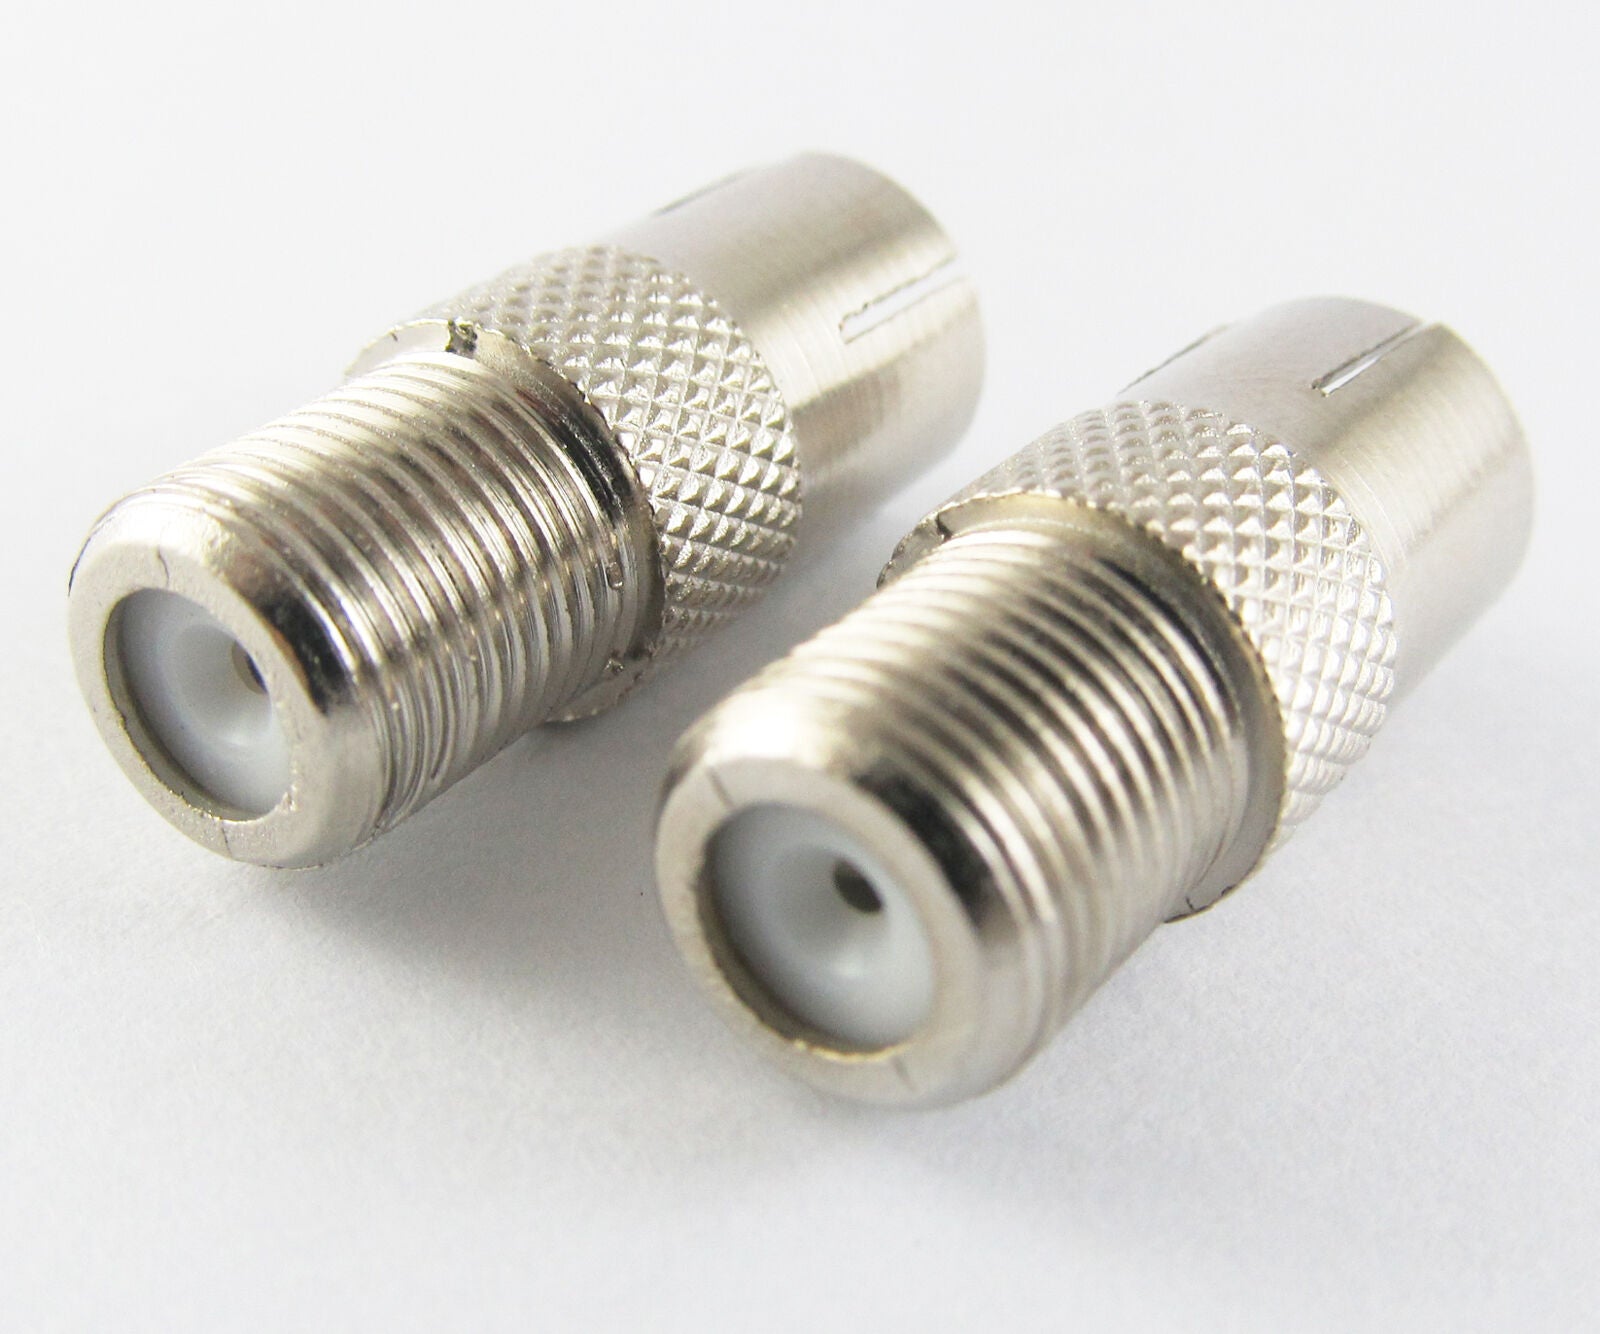 2pcs Nickel F Female Jack to TV PAL Female Jack Coaxial Connector Adapter Metal